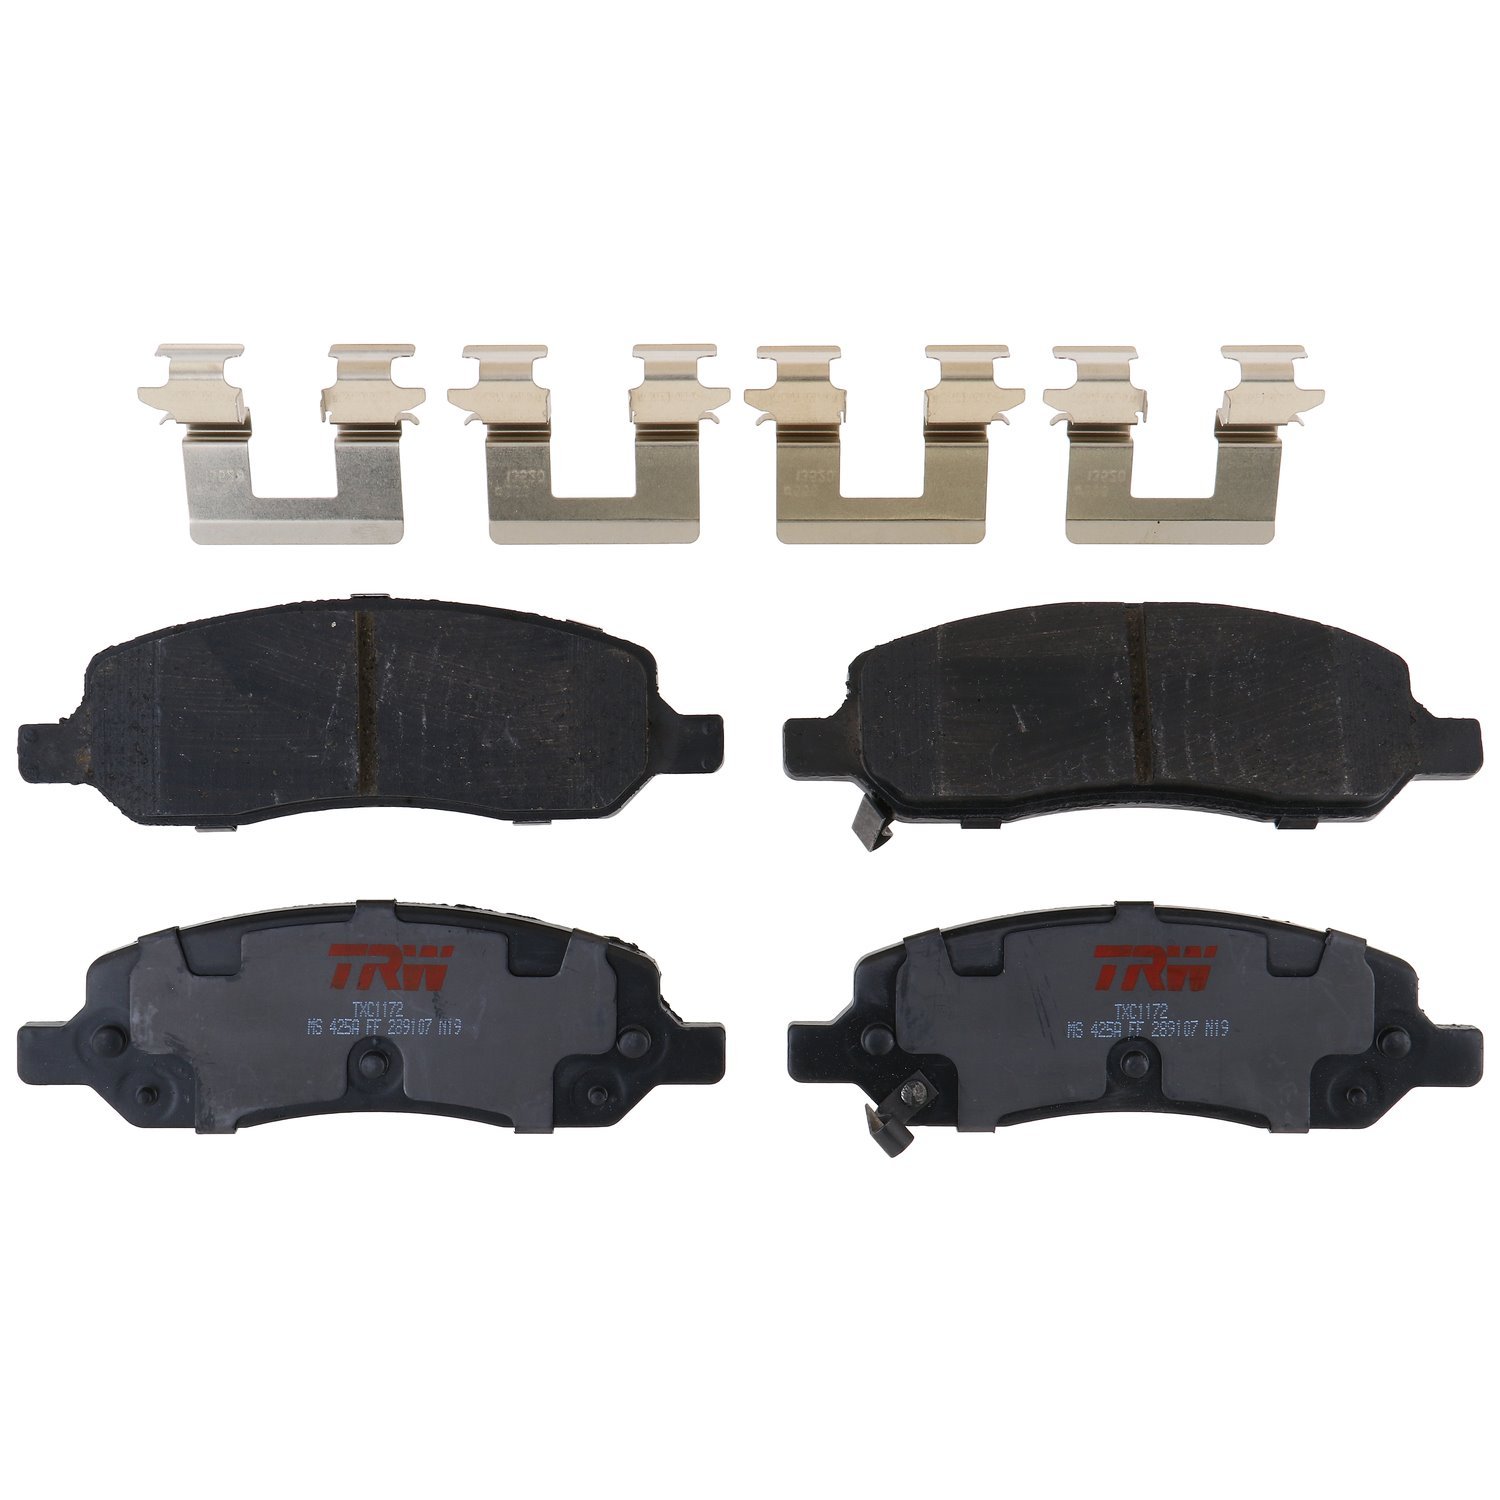 TXC1172 Ultra-Series Disc Brake Pad Set for Buick Lucerne 2011-2006, Cadillac DTS 2011-2006, Position: Rear